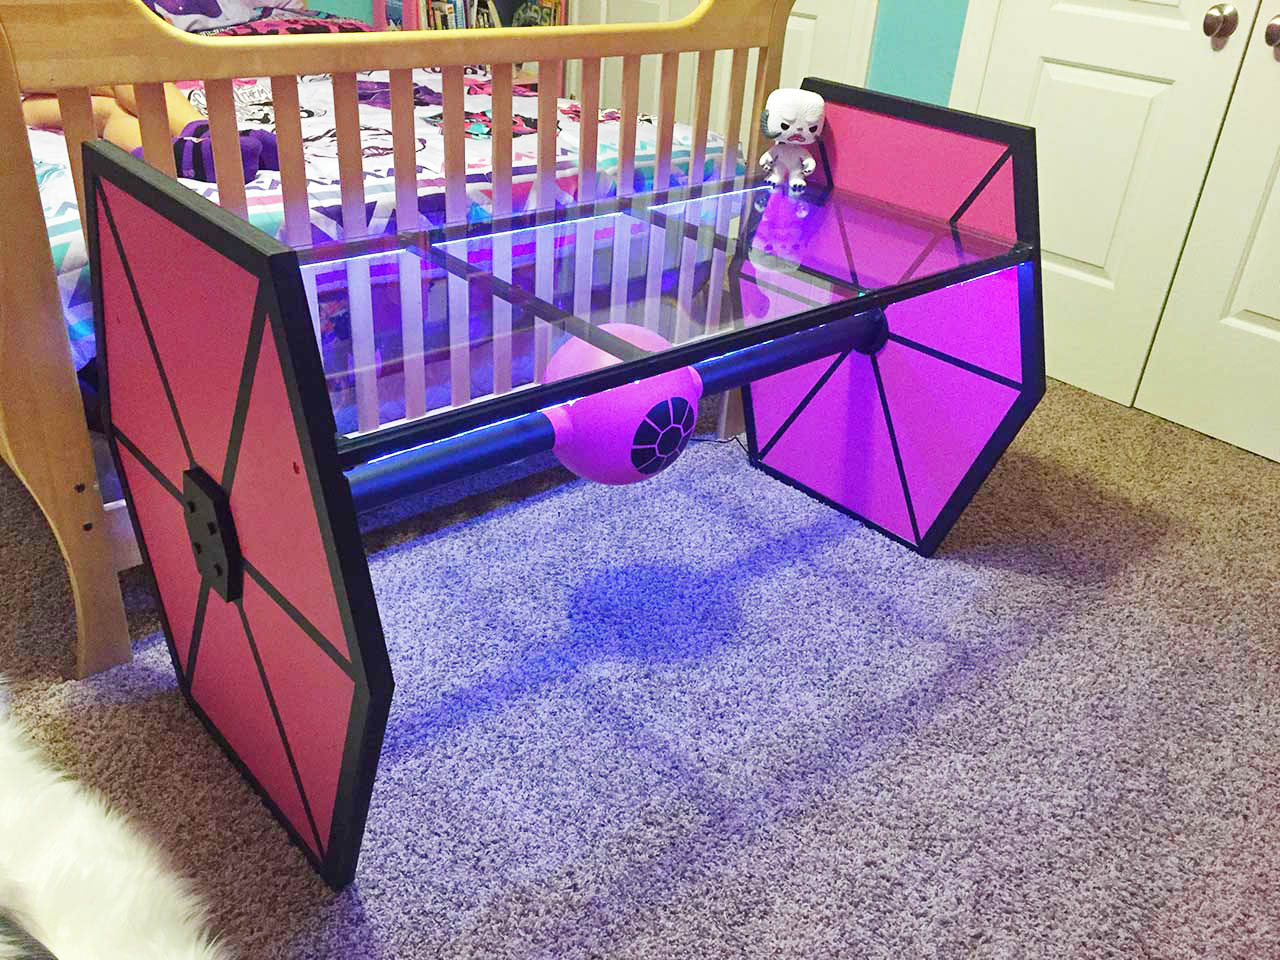 Not something you see every day, this pink tie fighter glass table is one-of-a-kind.